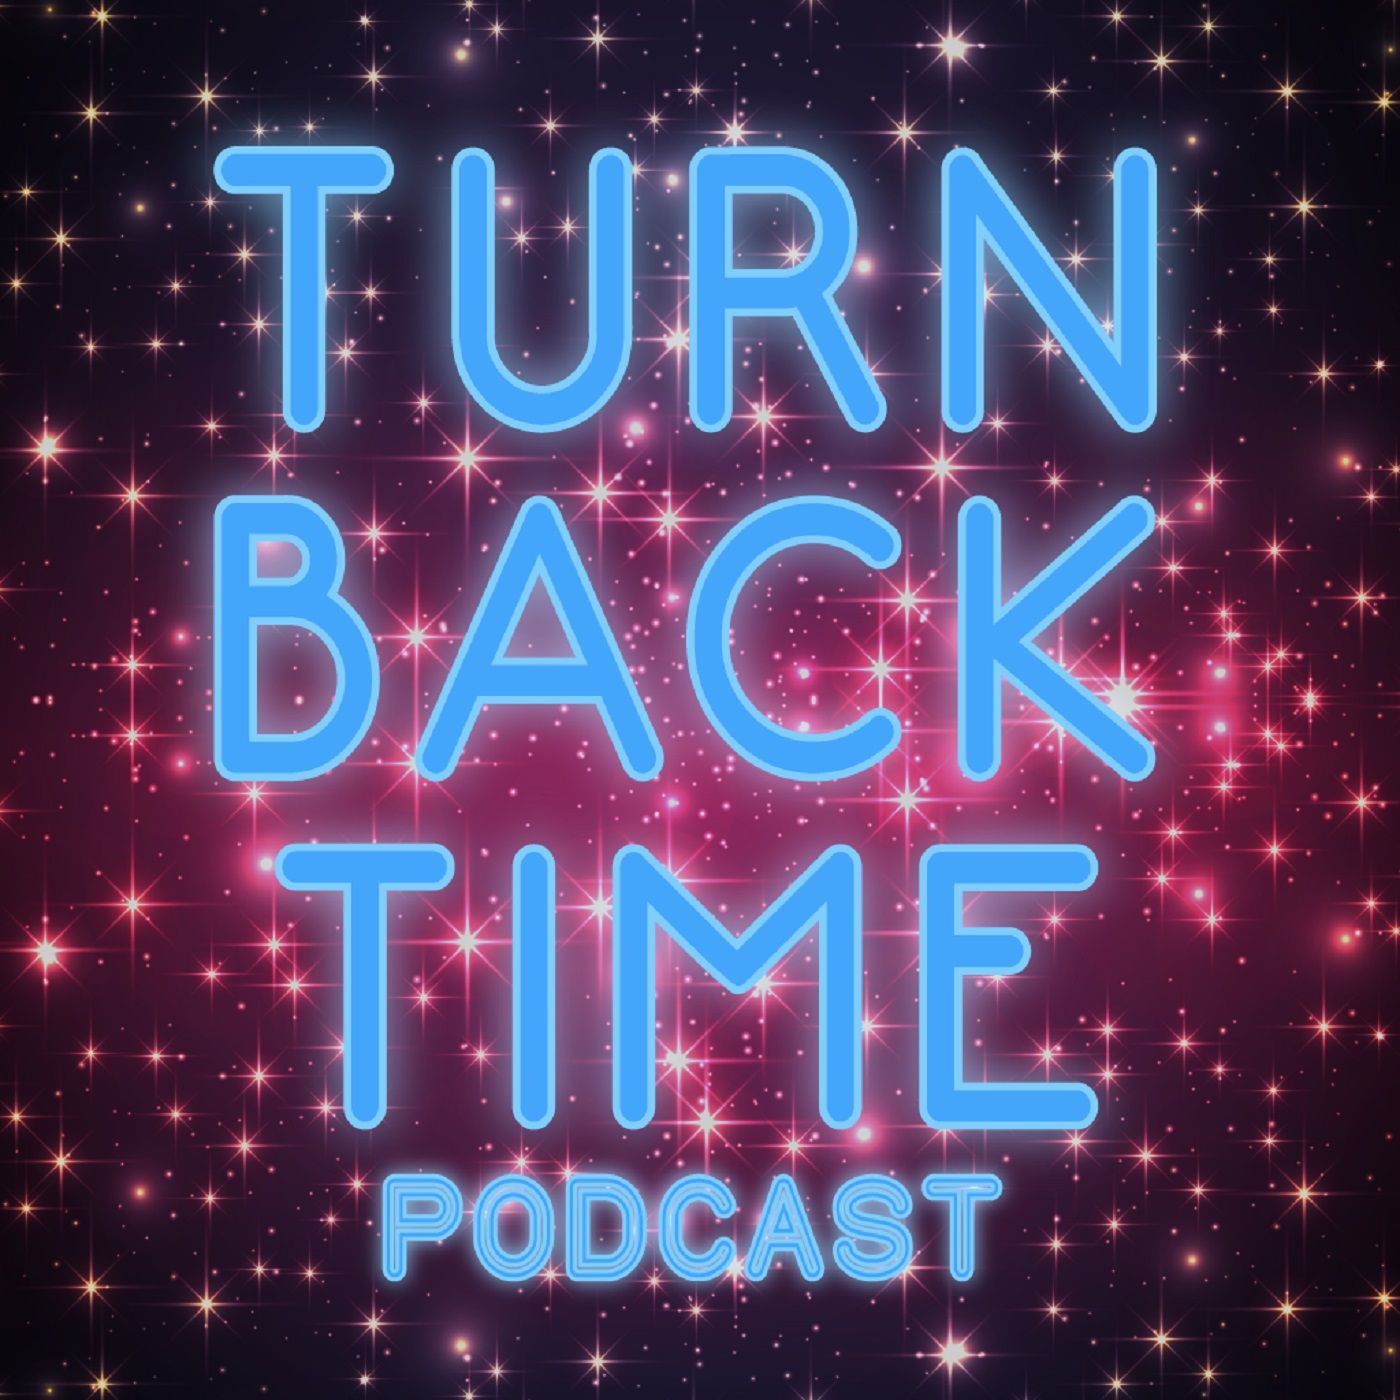 Turn Back Time: A Cher Podcast art image